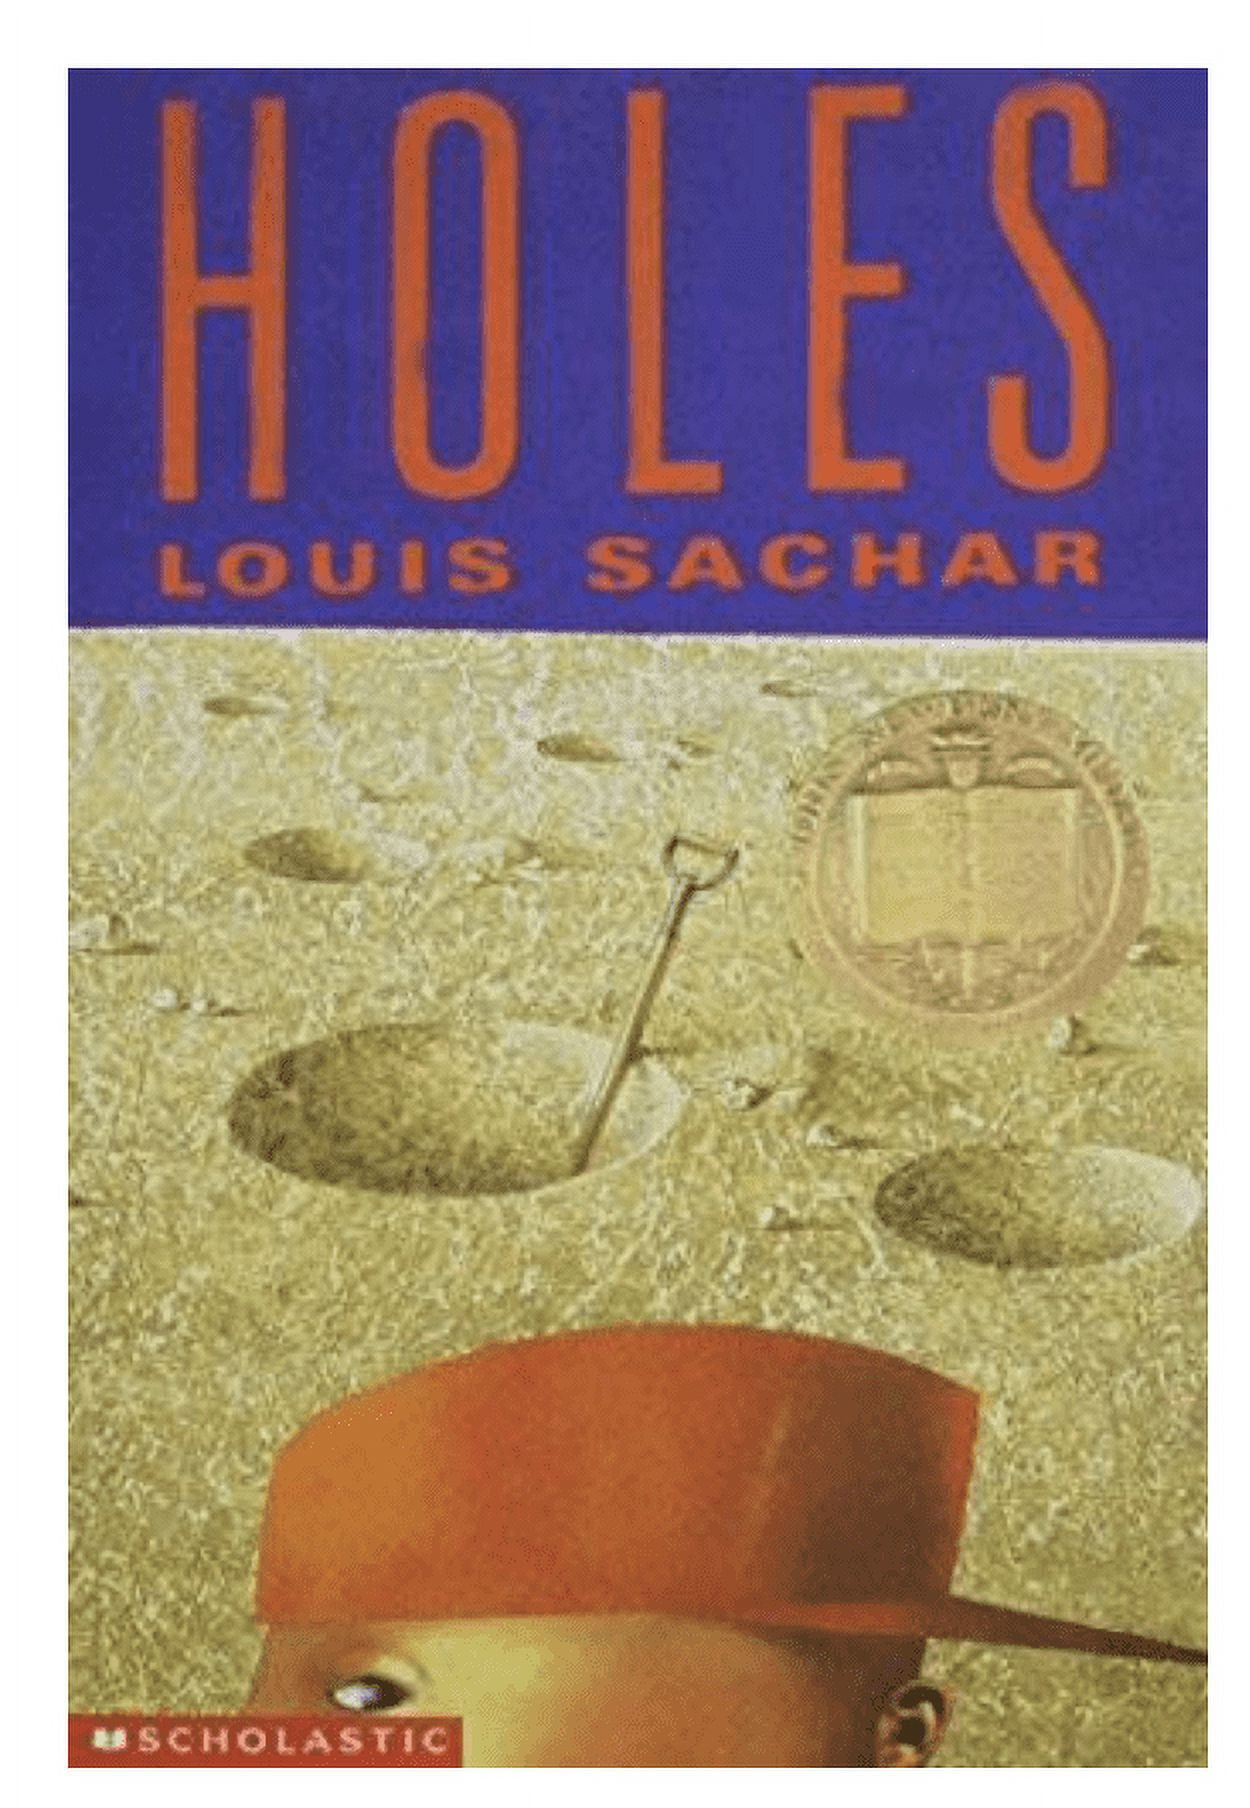 My 3 Life Affirming Lessons From Reading Holes by Louis Sachar